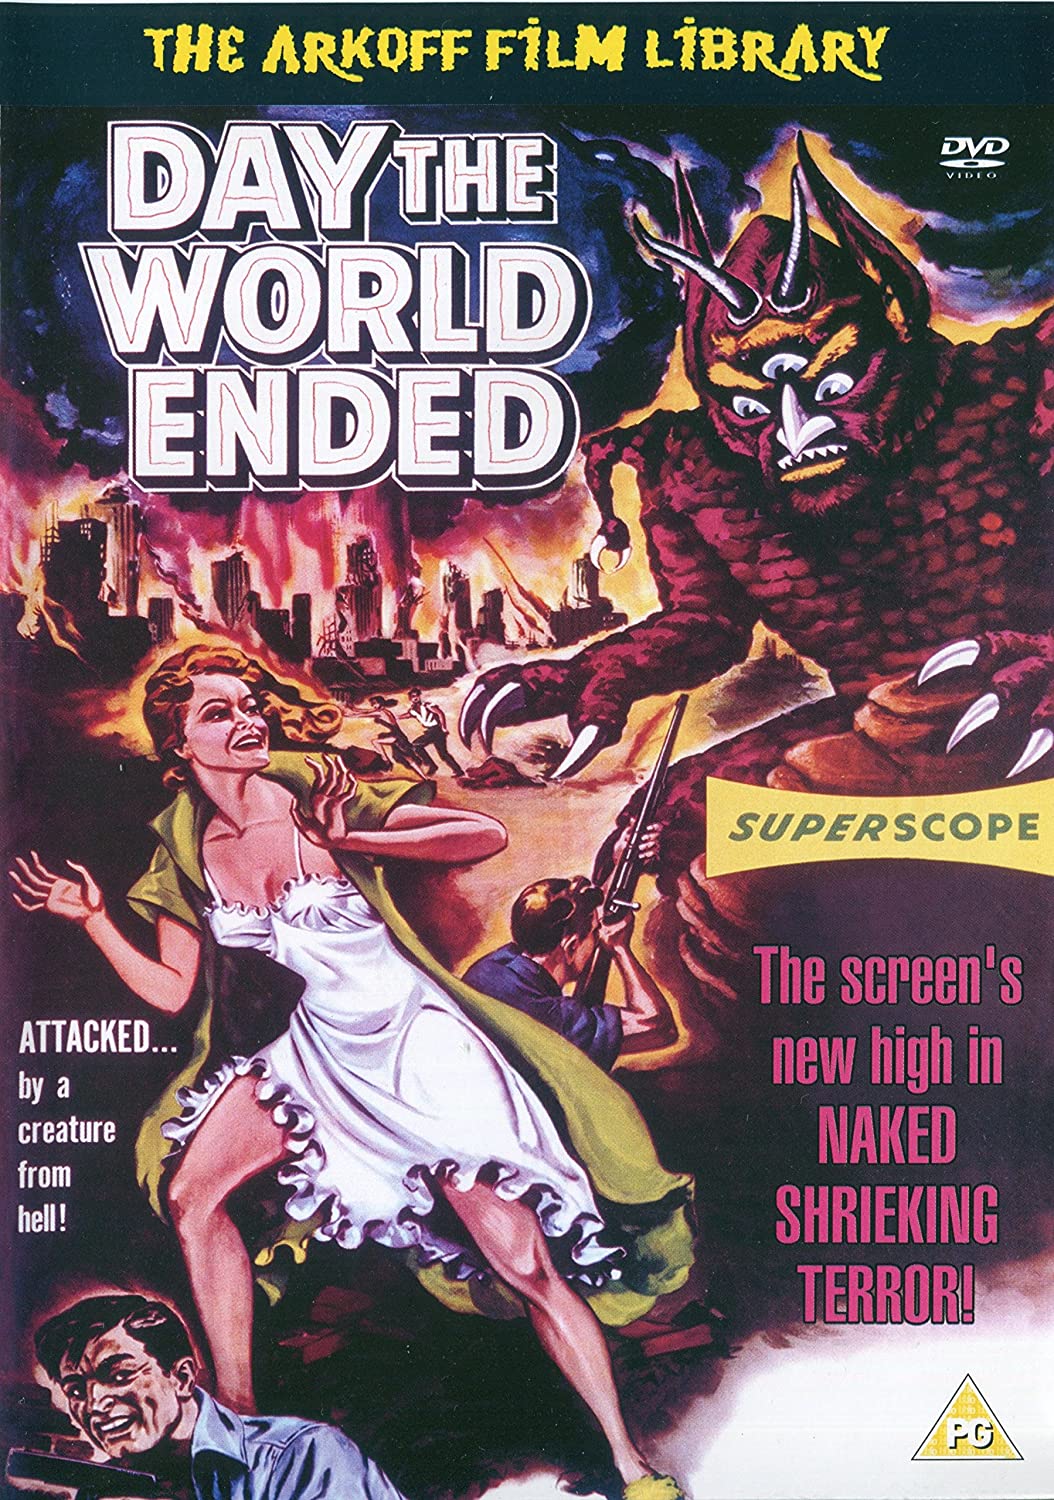 Day The World Ended (1955) starring Richard Denning, Lori Nelson, Mike Connors